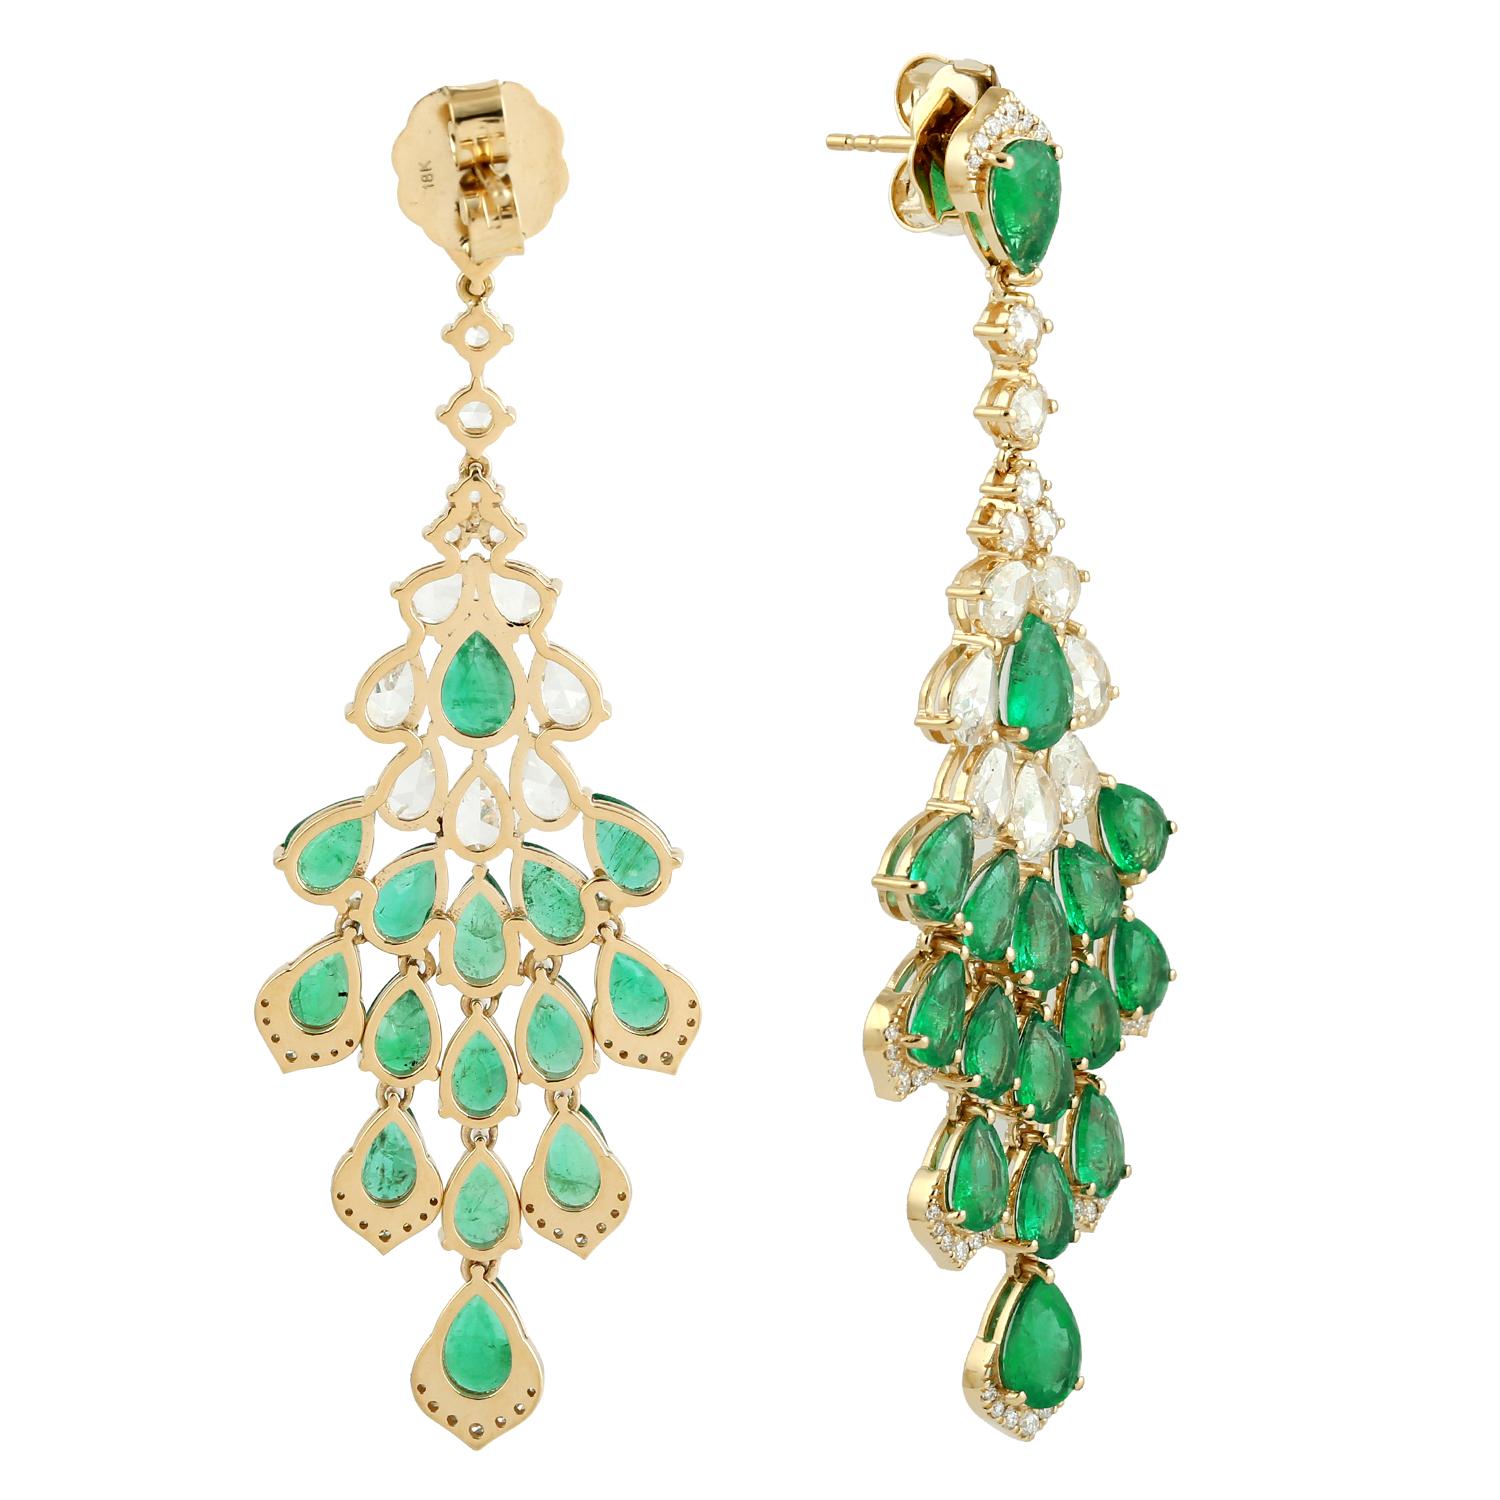 Art Deco 11.34ct Pear Shaped Emerald Dangle Earrings With Diamonds In 18k Yellow Gold For Sale